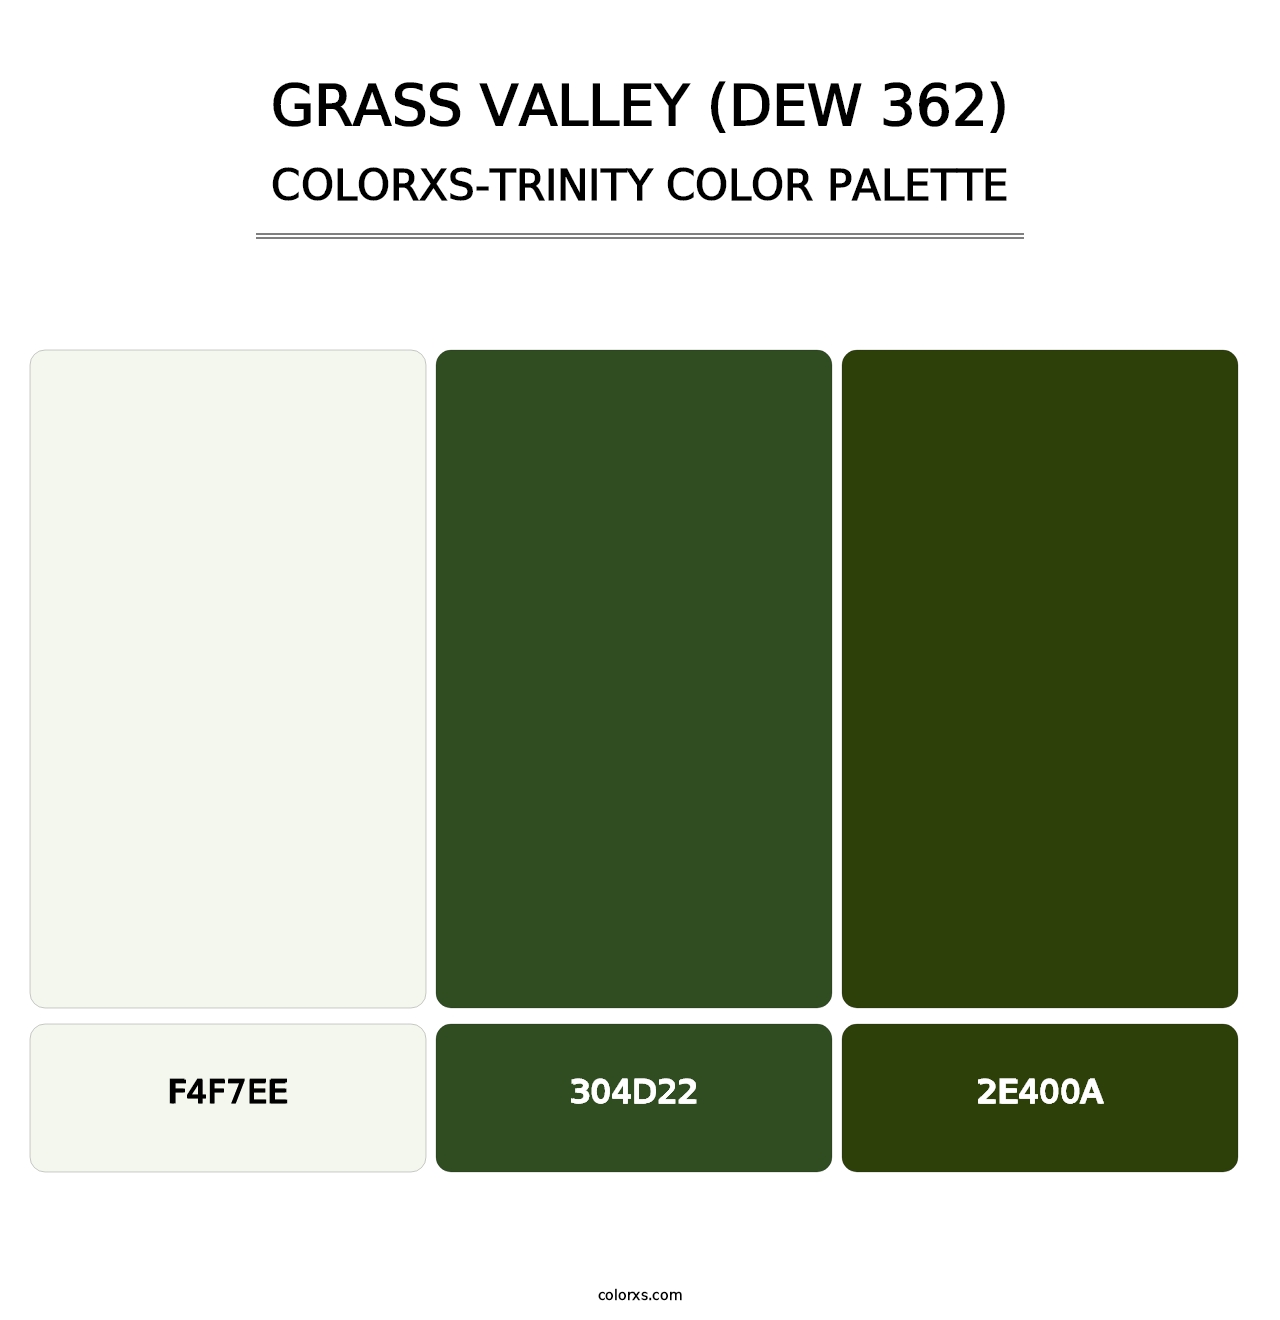 Grass Valley (DEW 362) - Colorxs Trinity Palette